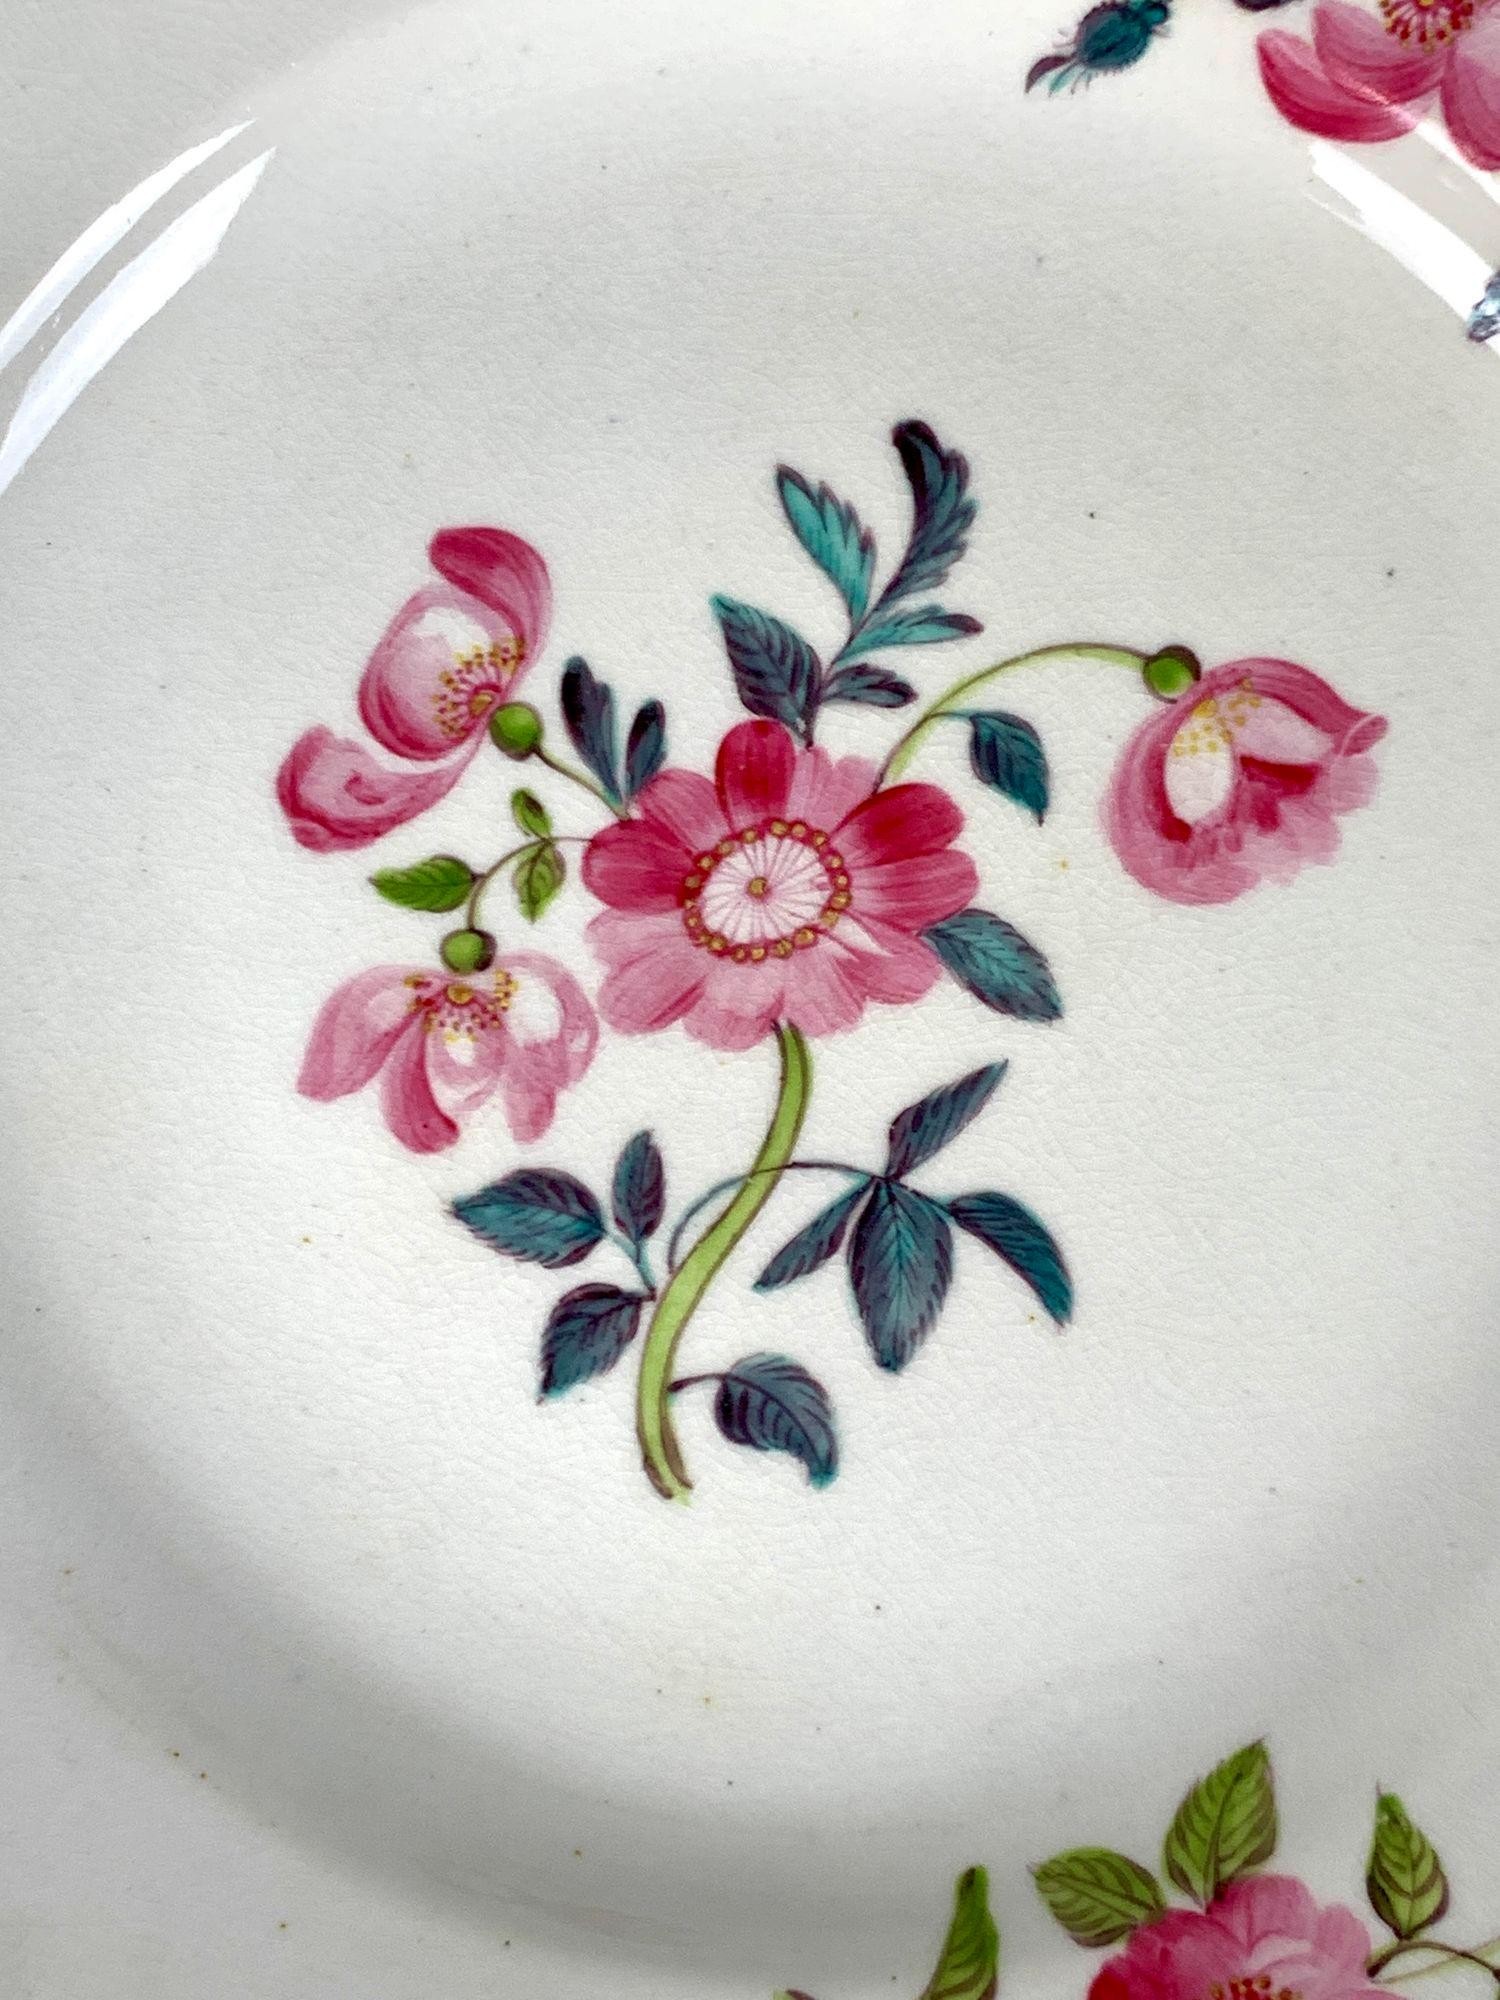 These lovely dishes were made in England around 1815.
They have hand-painted pink roses on bright white Derby porcelain, complemented by green and turquoise leaves.
During the late 18th and early 19th century, flower painting was a popular style for